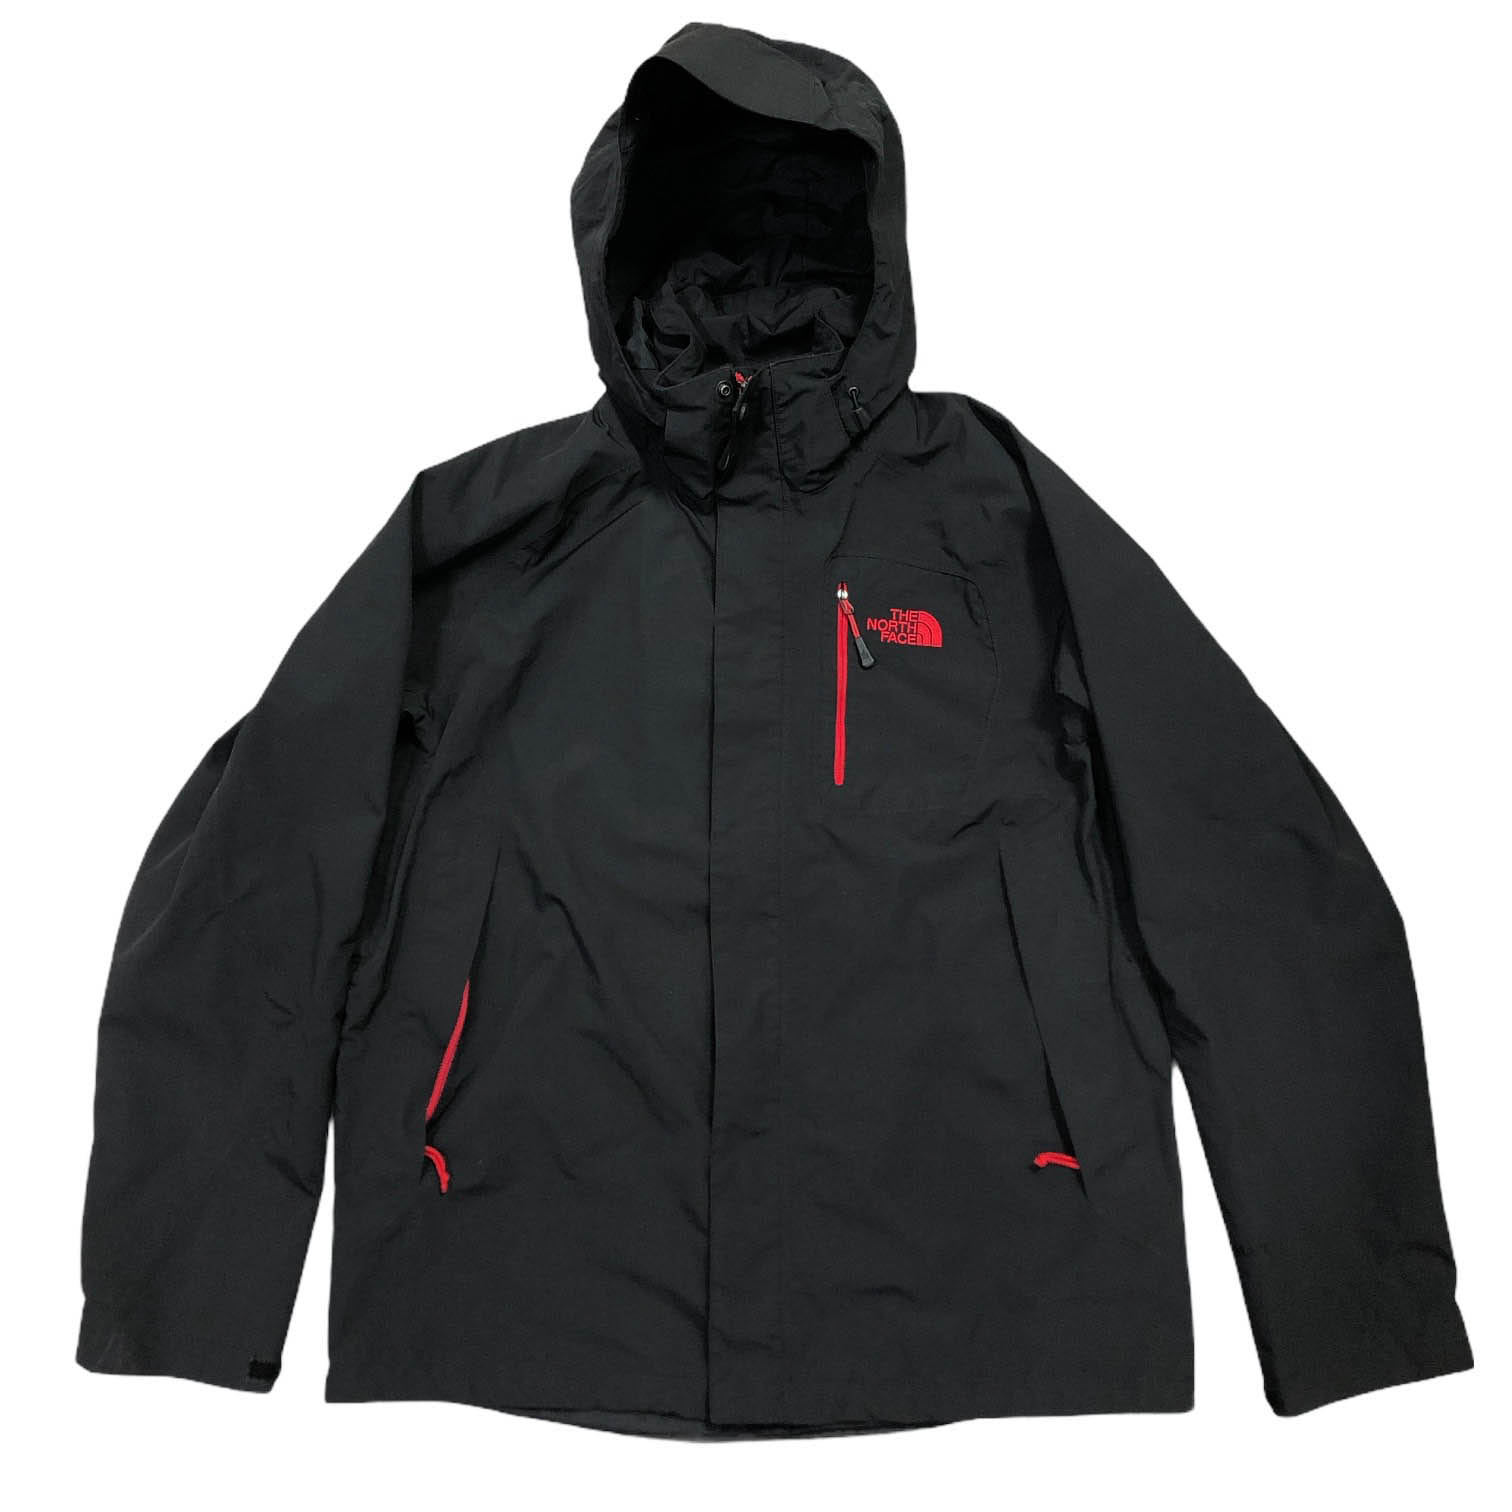 [The North Face] Windbreaker Black and Red - Size M